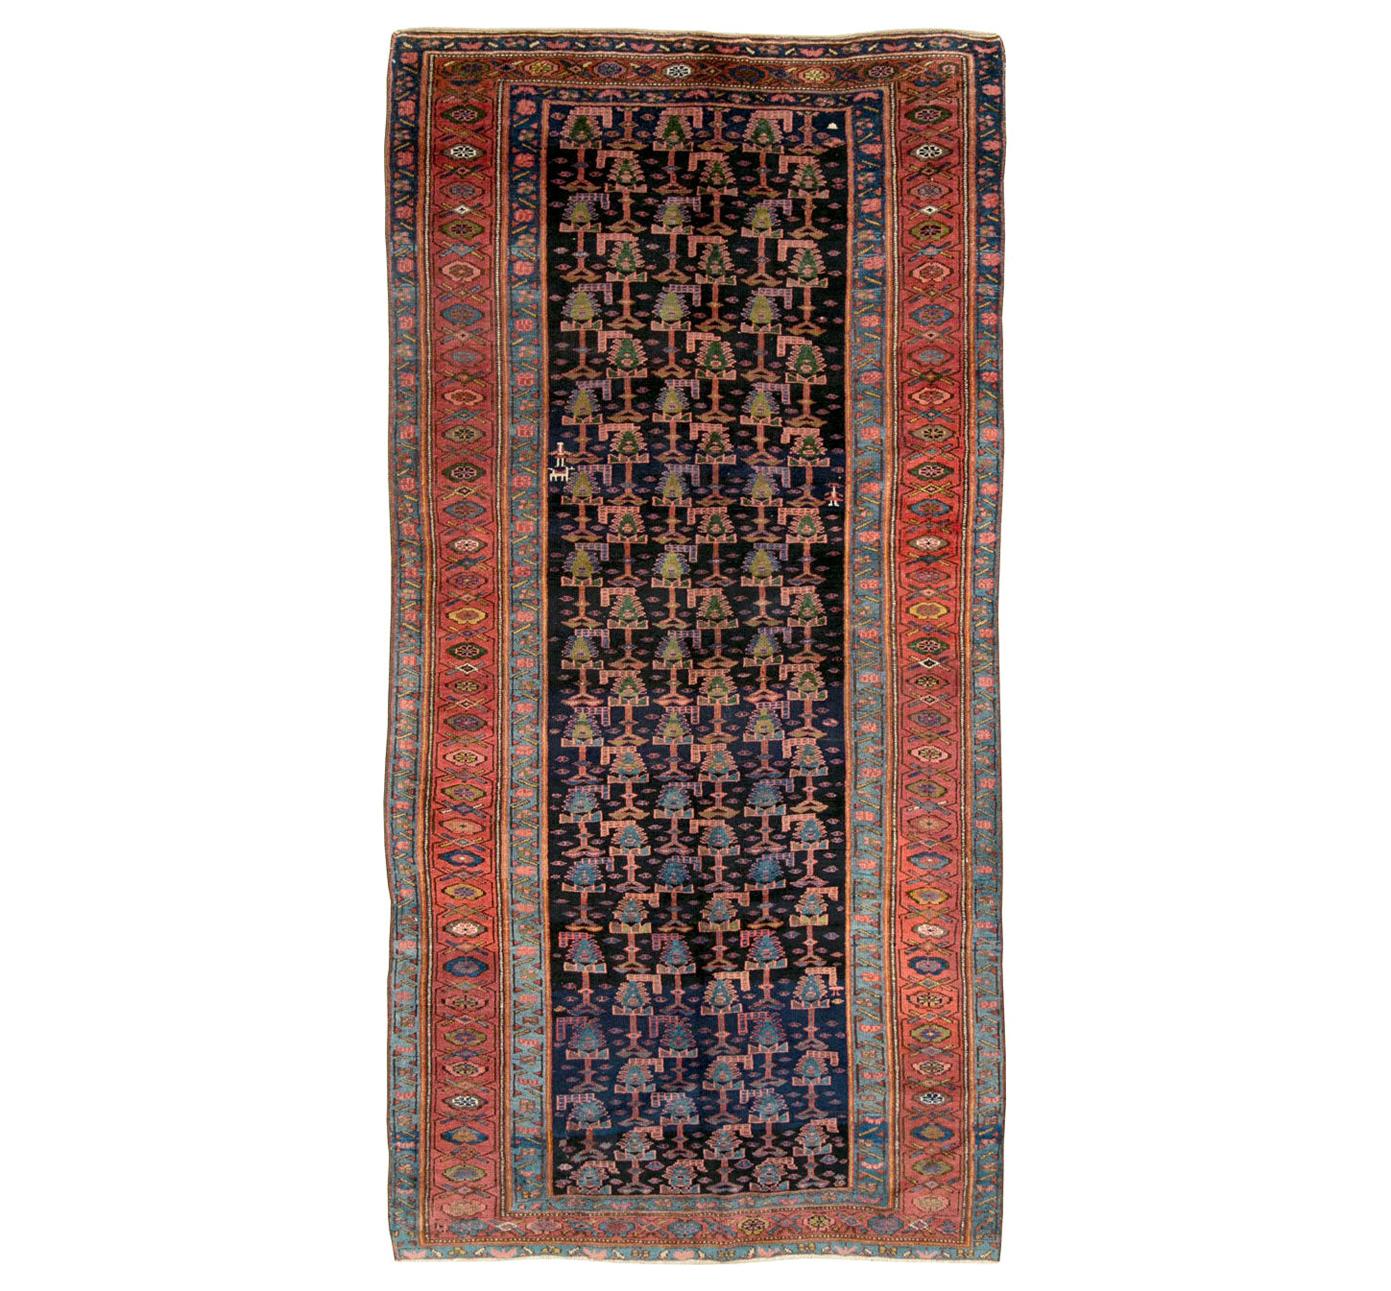 Early 20th Century Handmade Persian Tribal Gallery Accent Rug in Jewel Tones For Sale